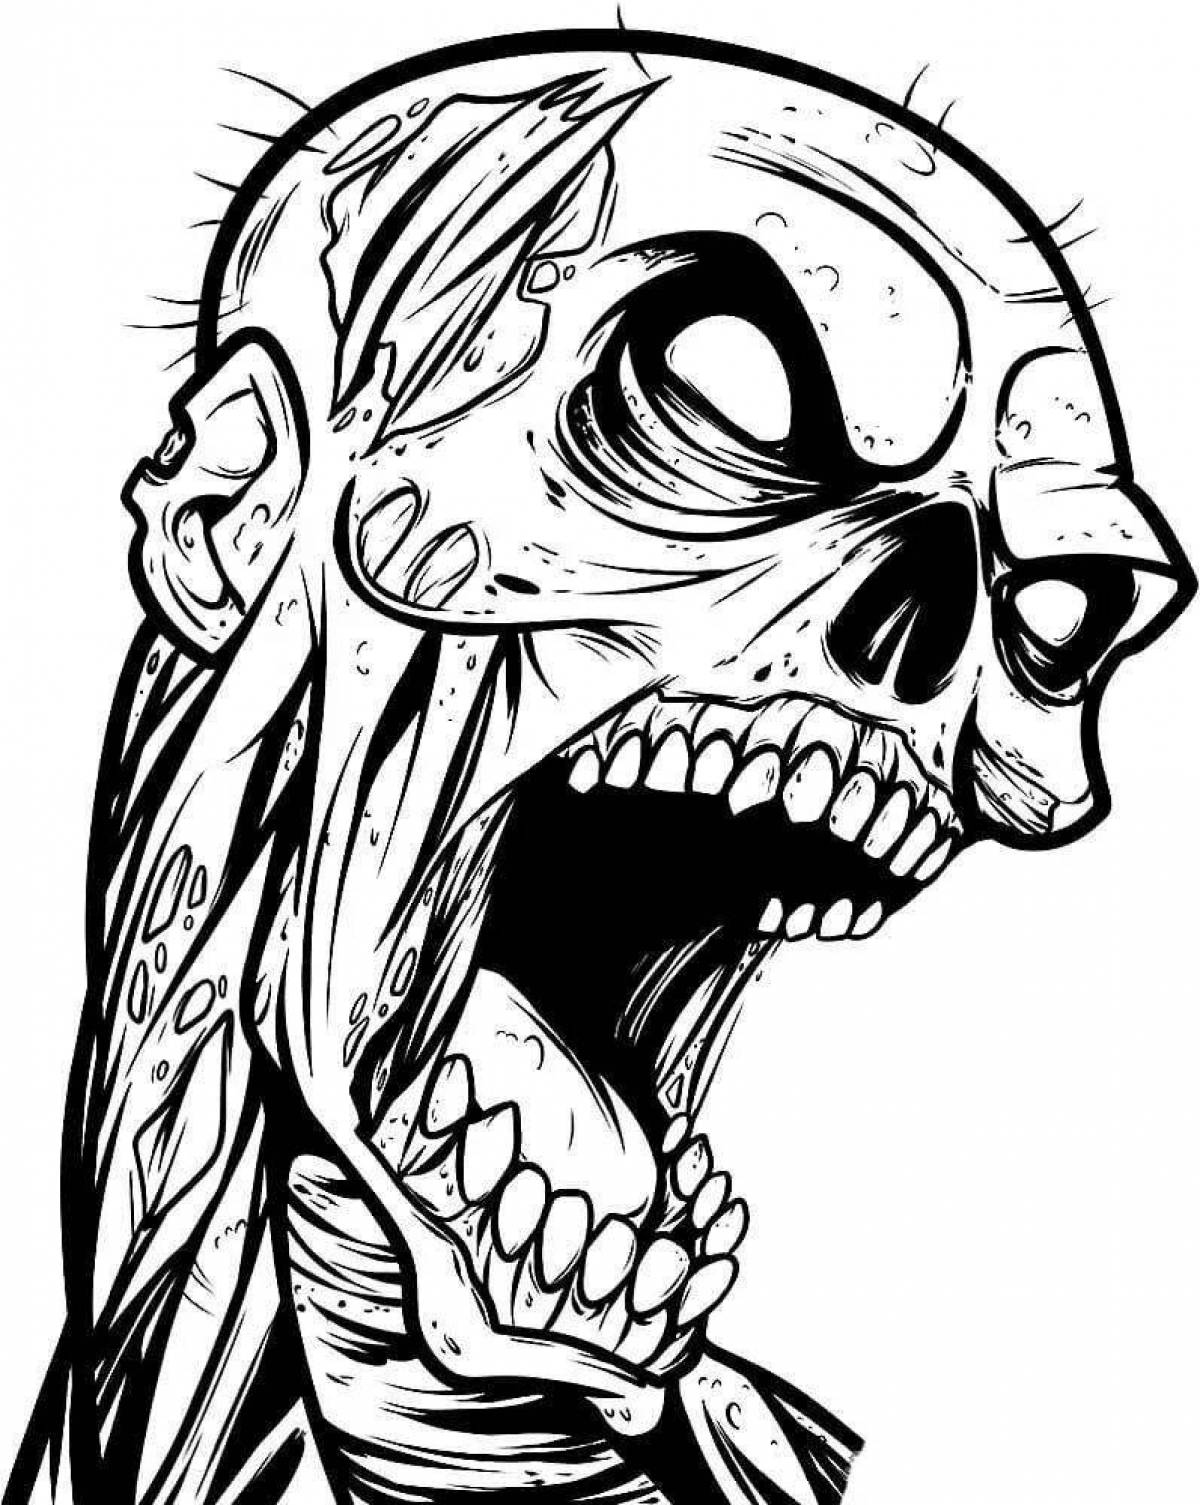 Ominous coloring pages, horror movies